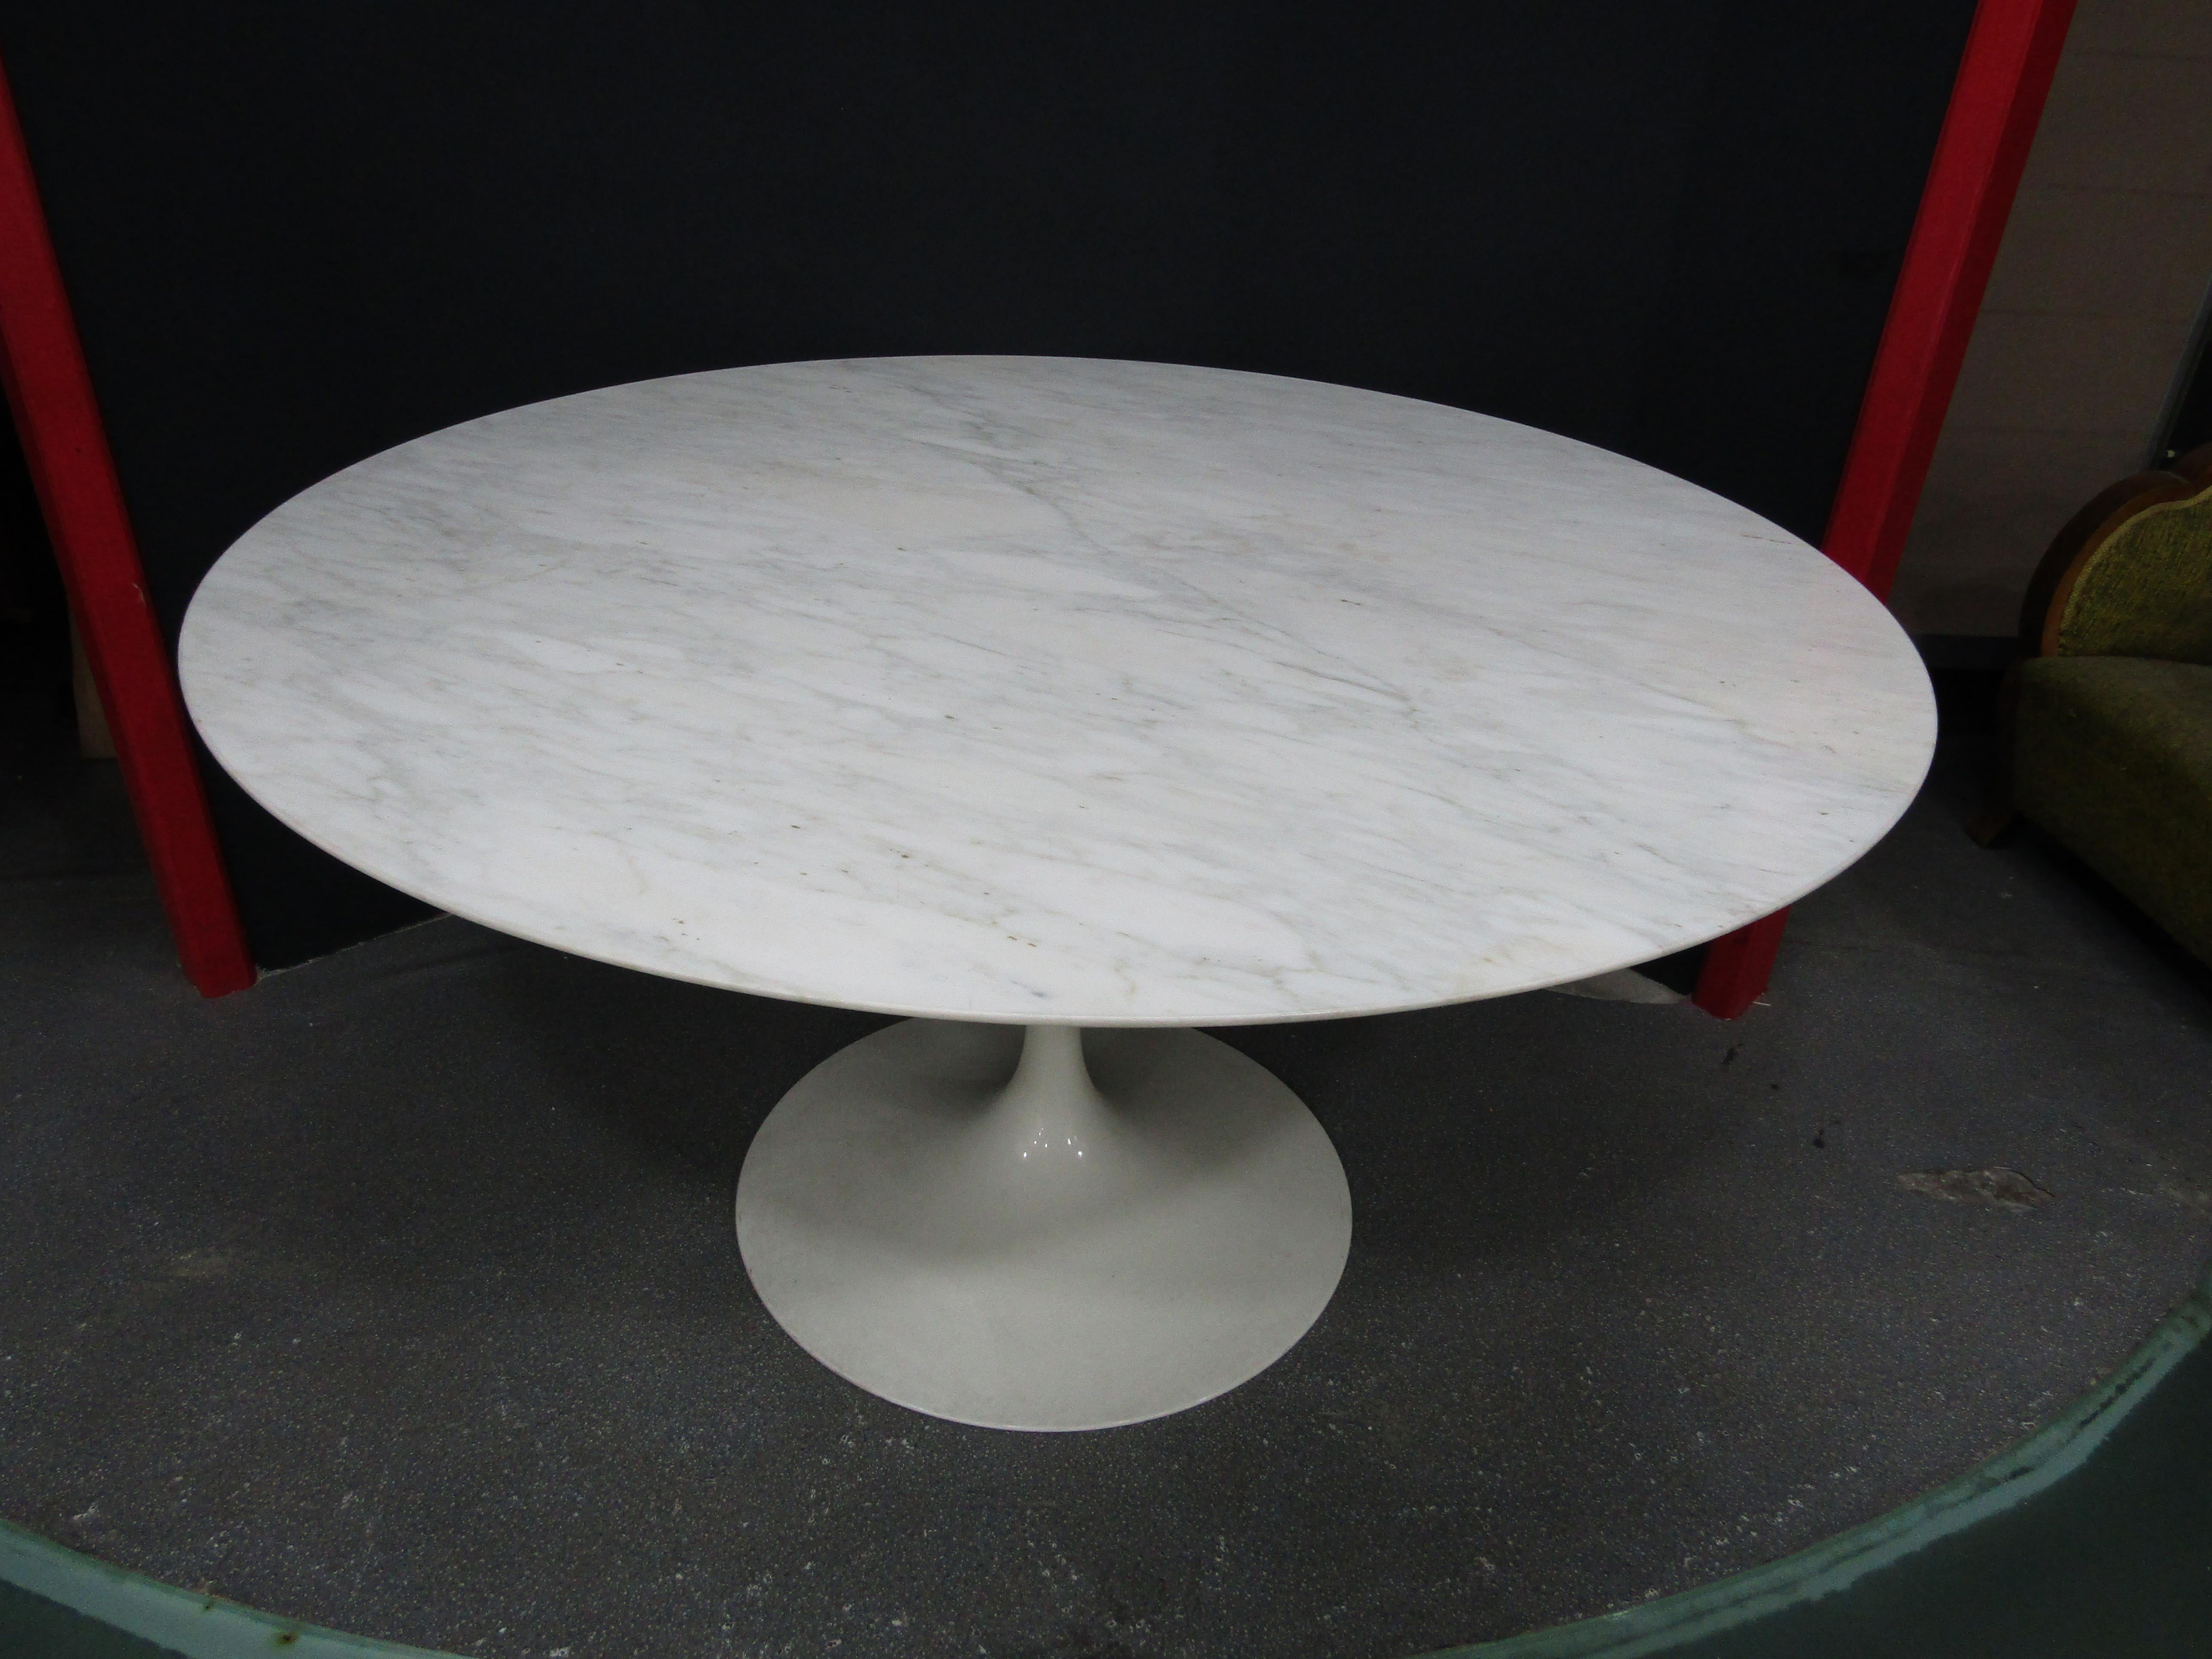 Tulip dining table designed by Eero Saarinen for Knoll, USA in 1976. White metal circular leg with a white Arabescato marble tabletop.